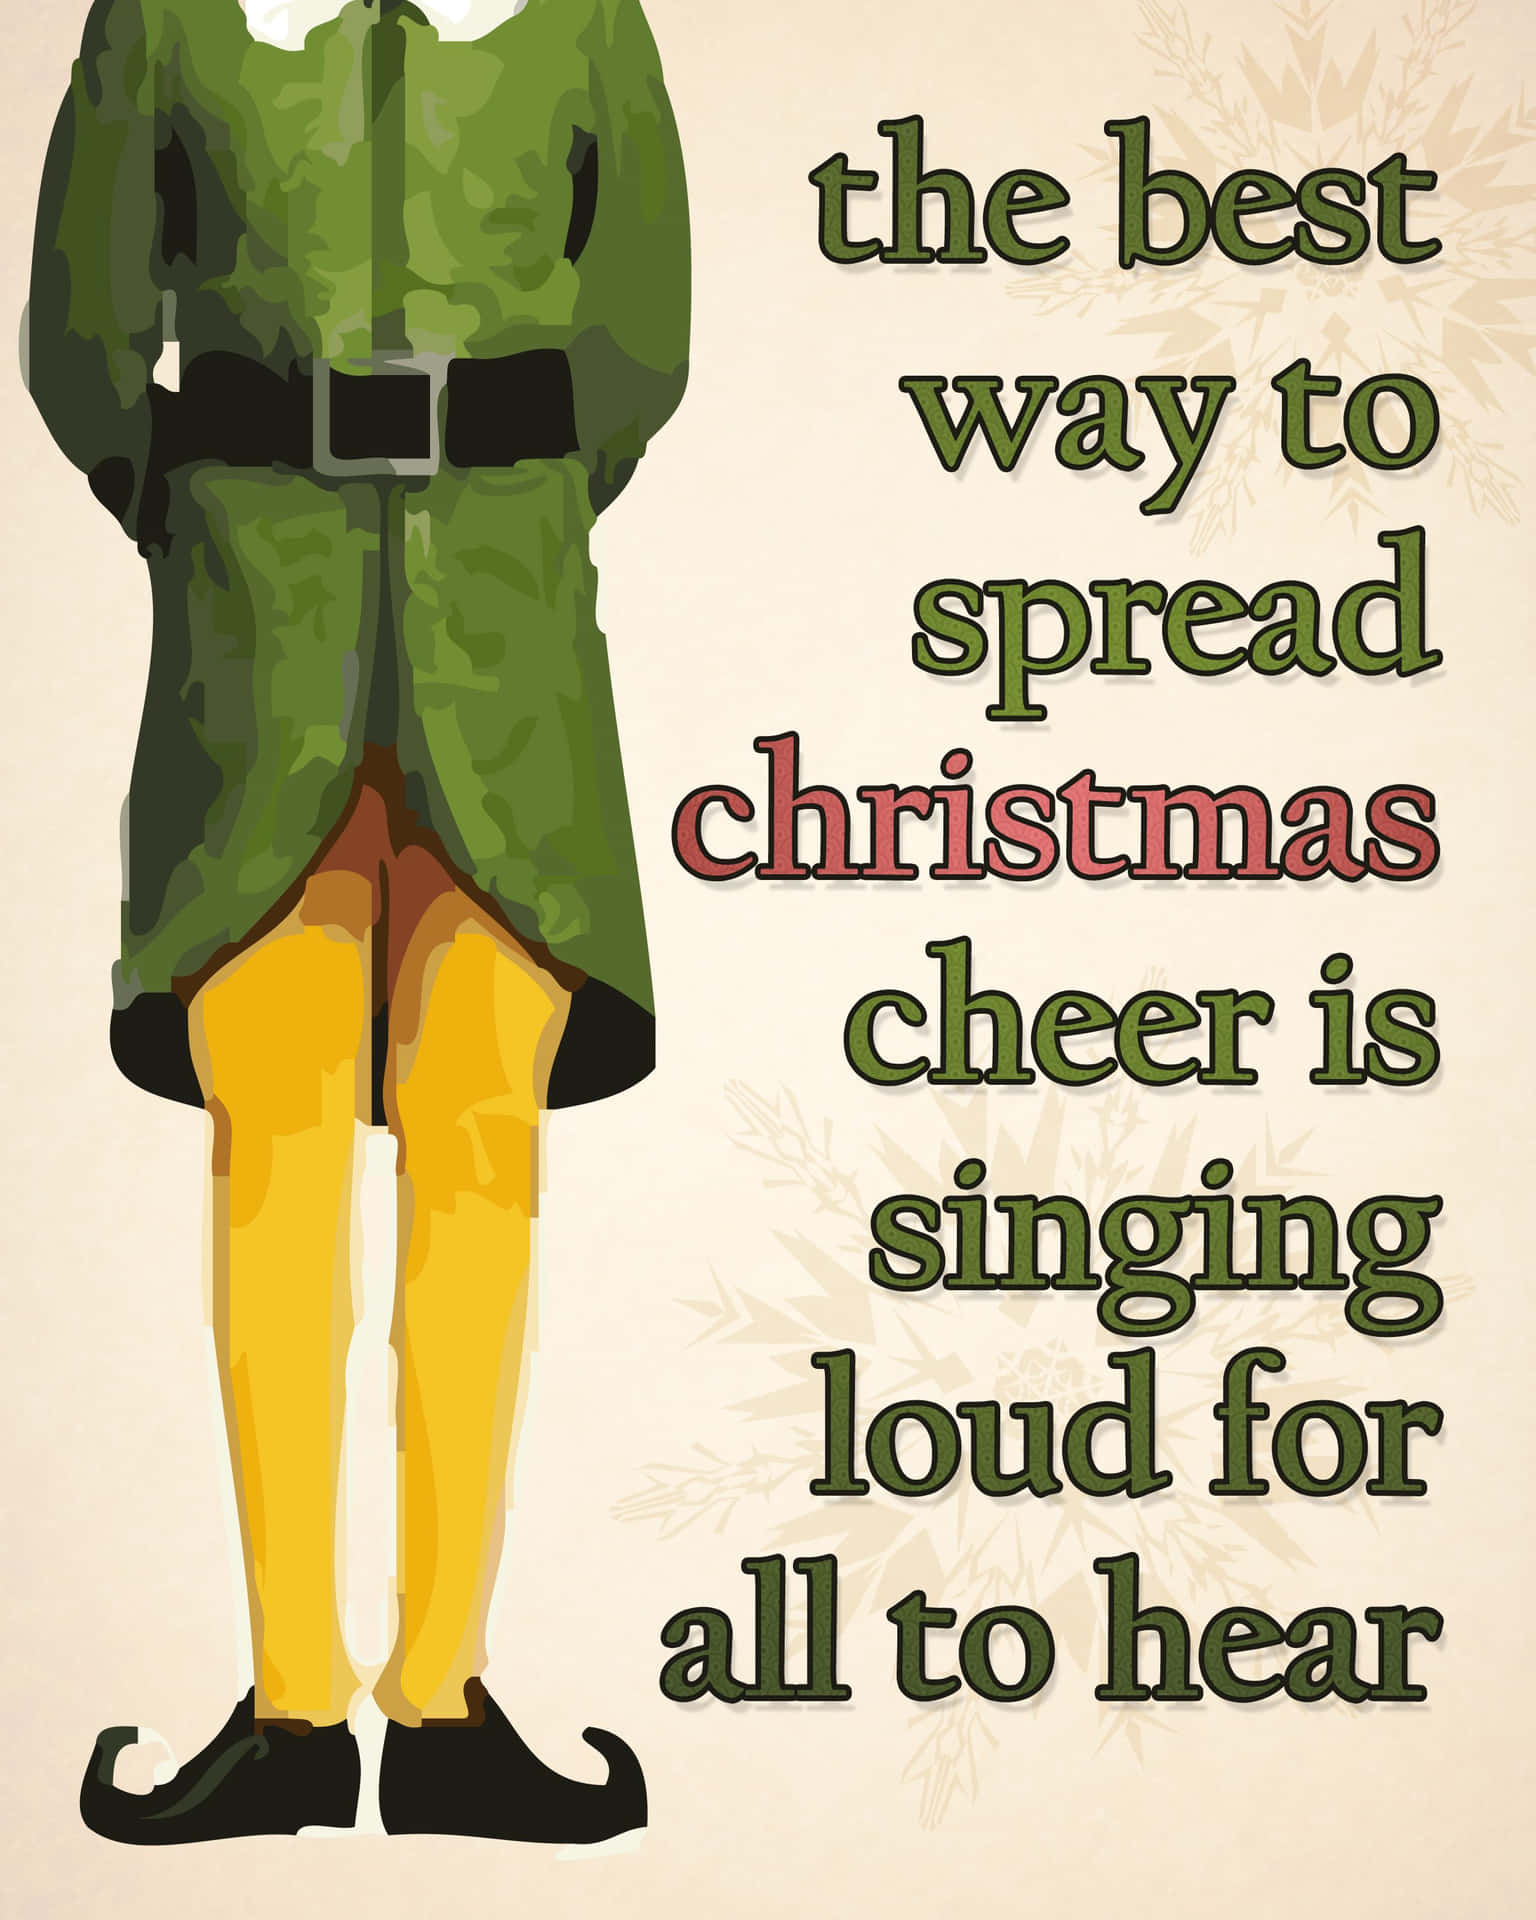 Show Some Christmas Cheer With Buddy The Elf Wallpaper